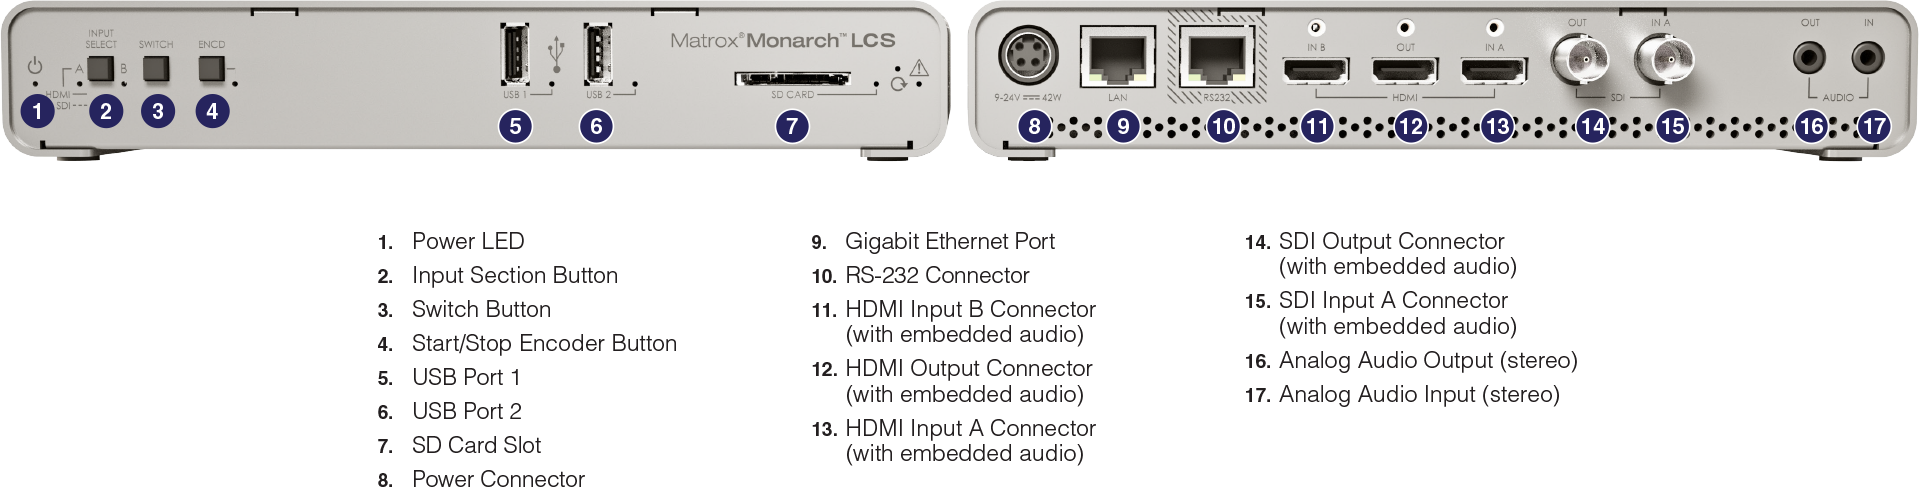 monarch lcs connections